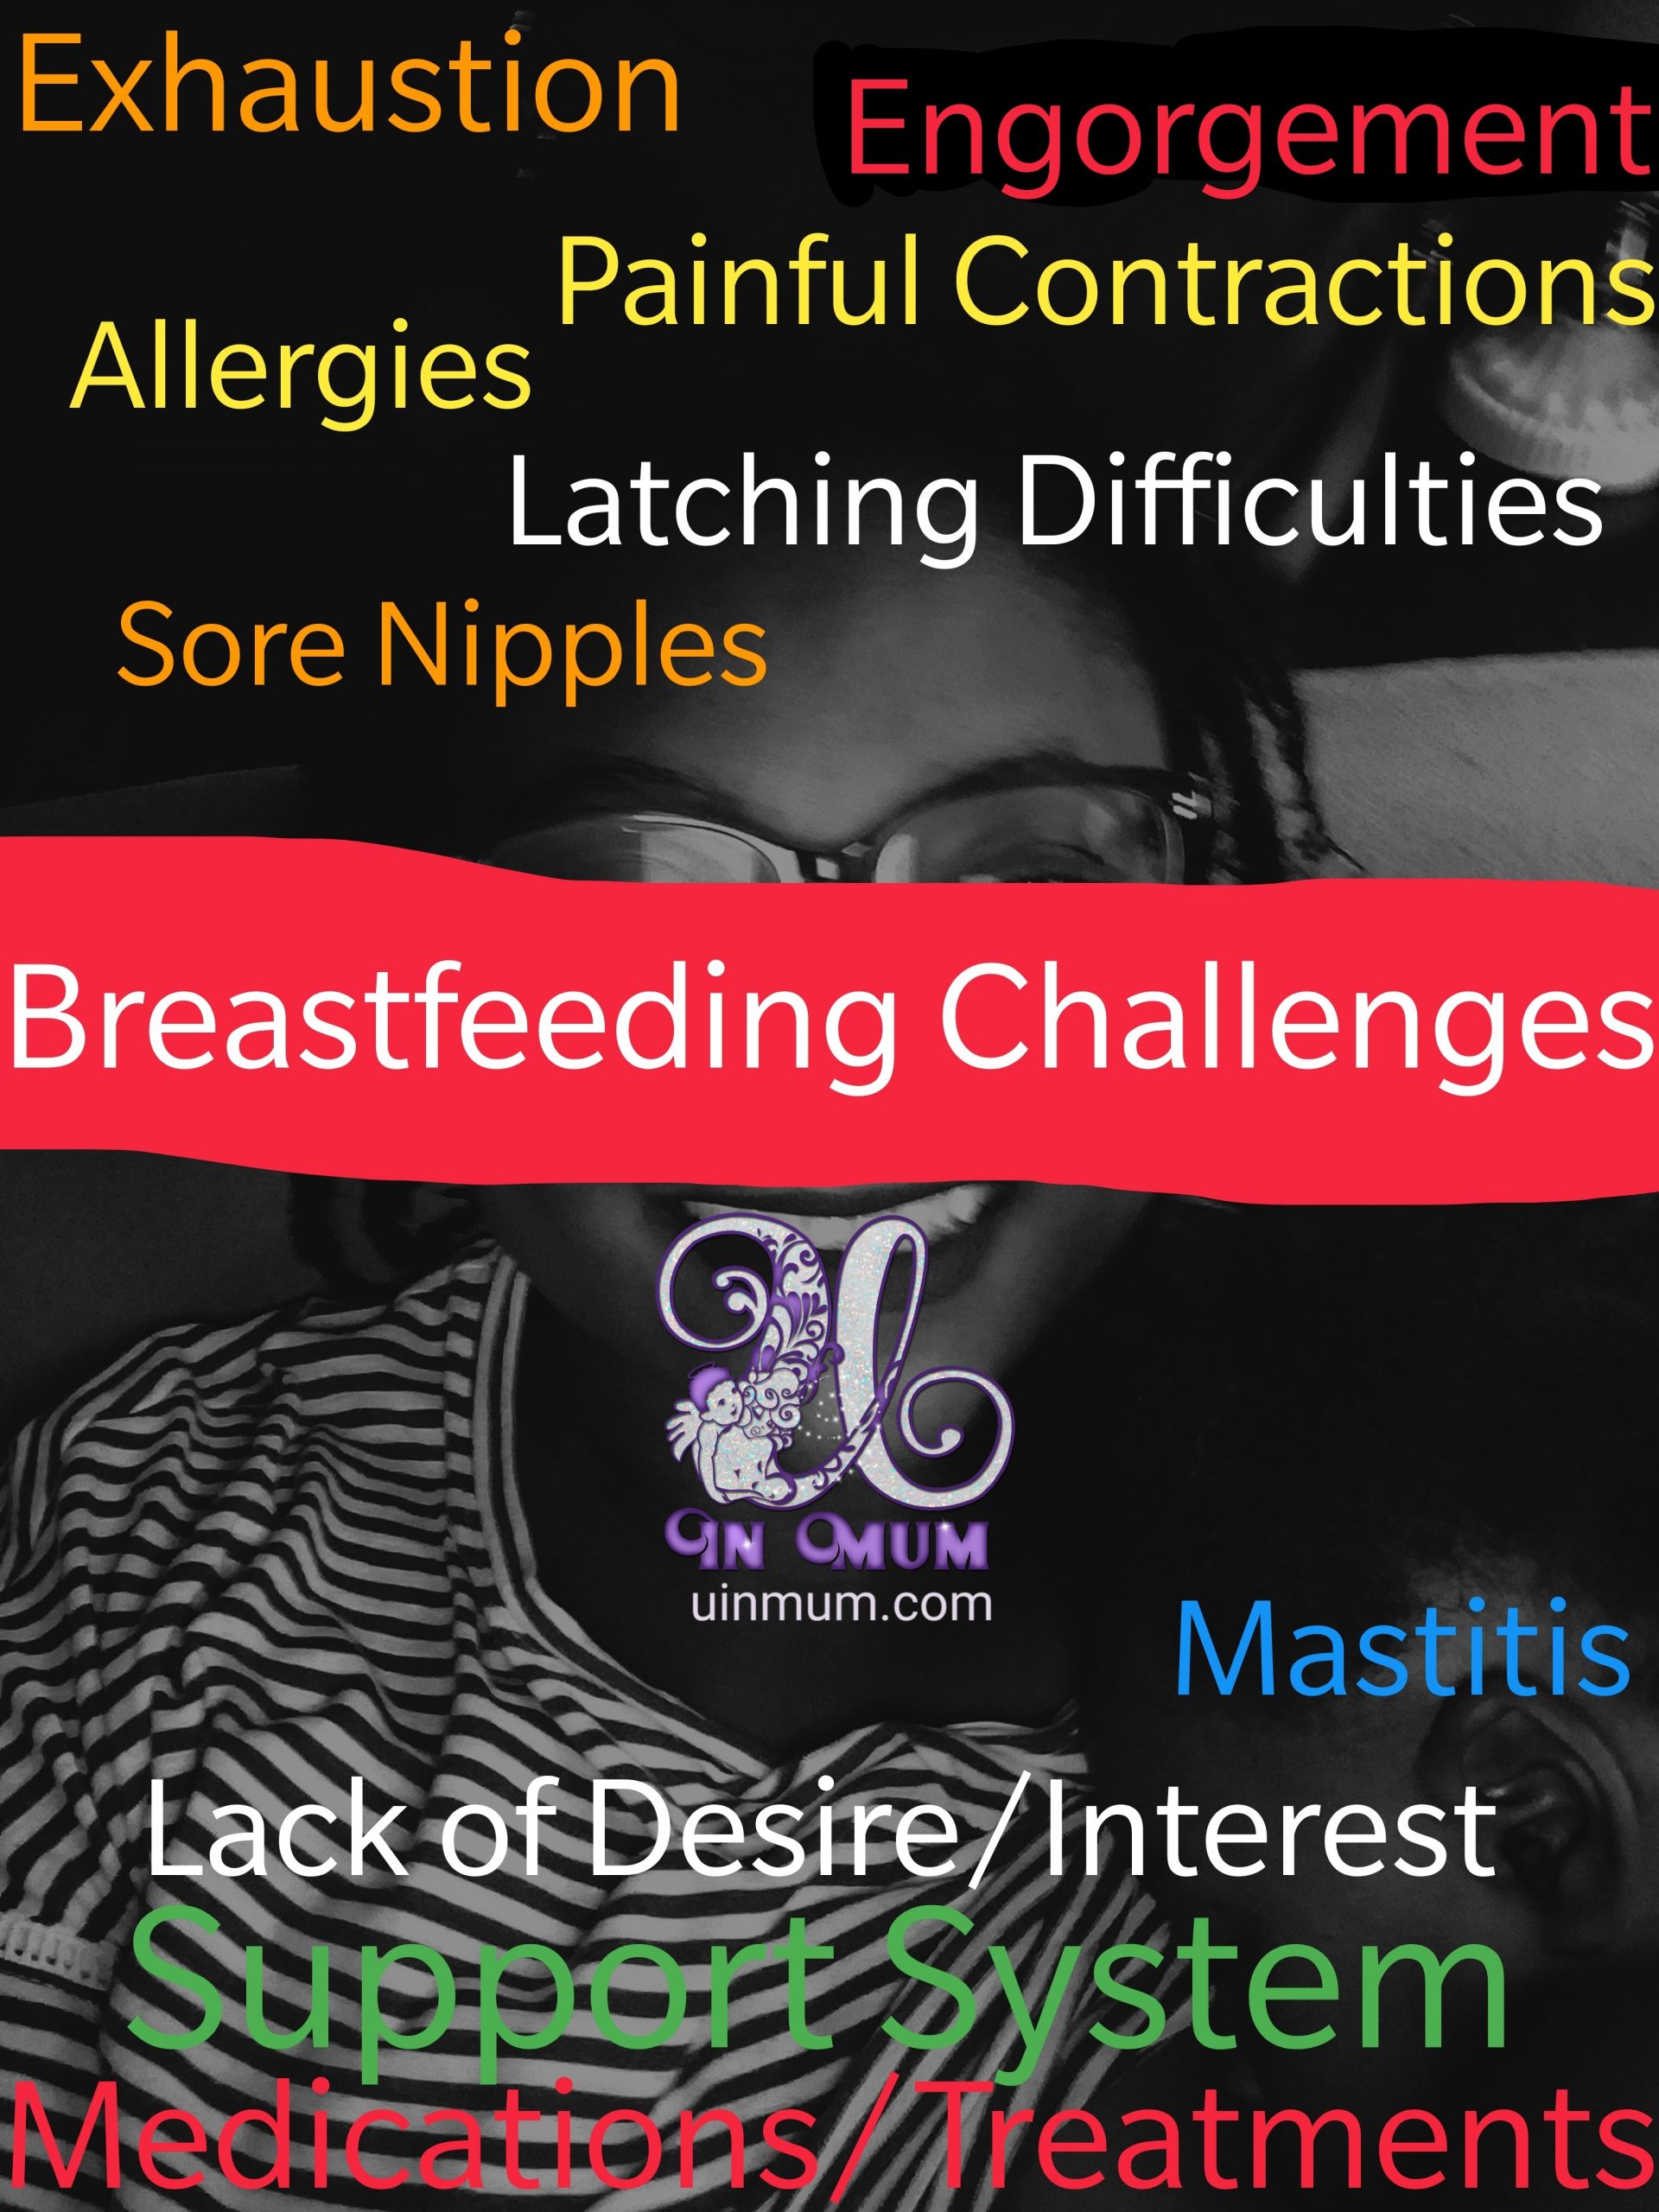 10 Potential Challenges Faced by Breastfeeding Mums